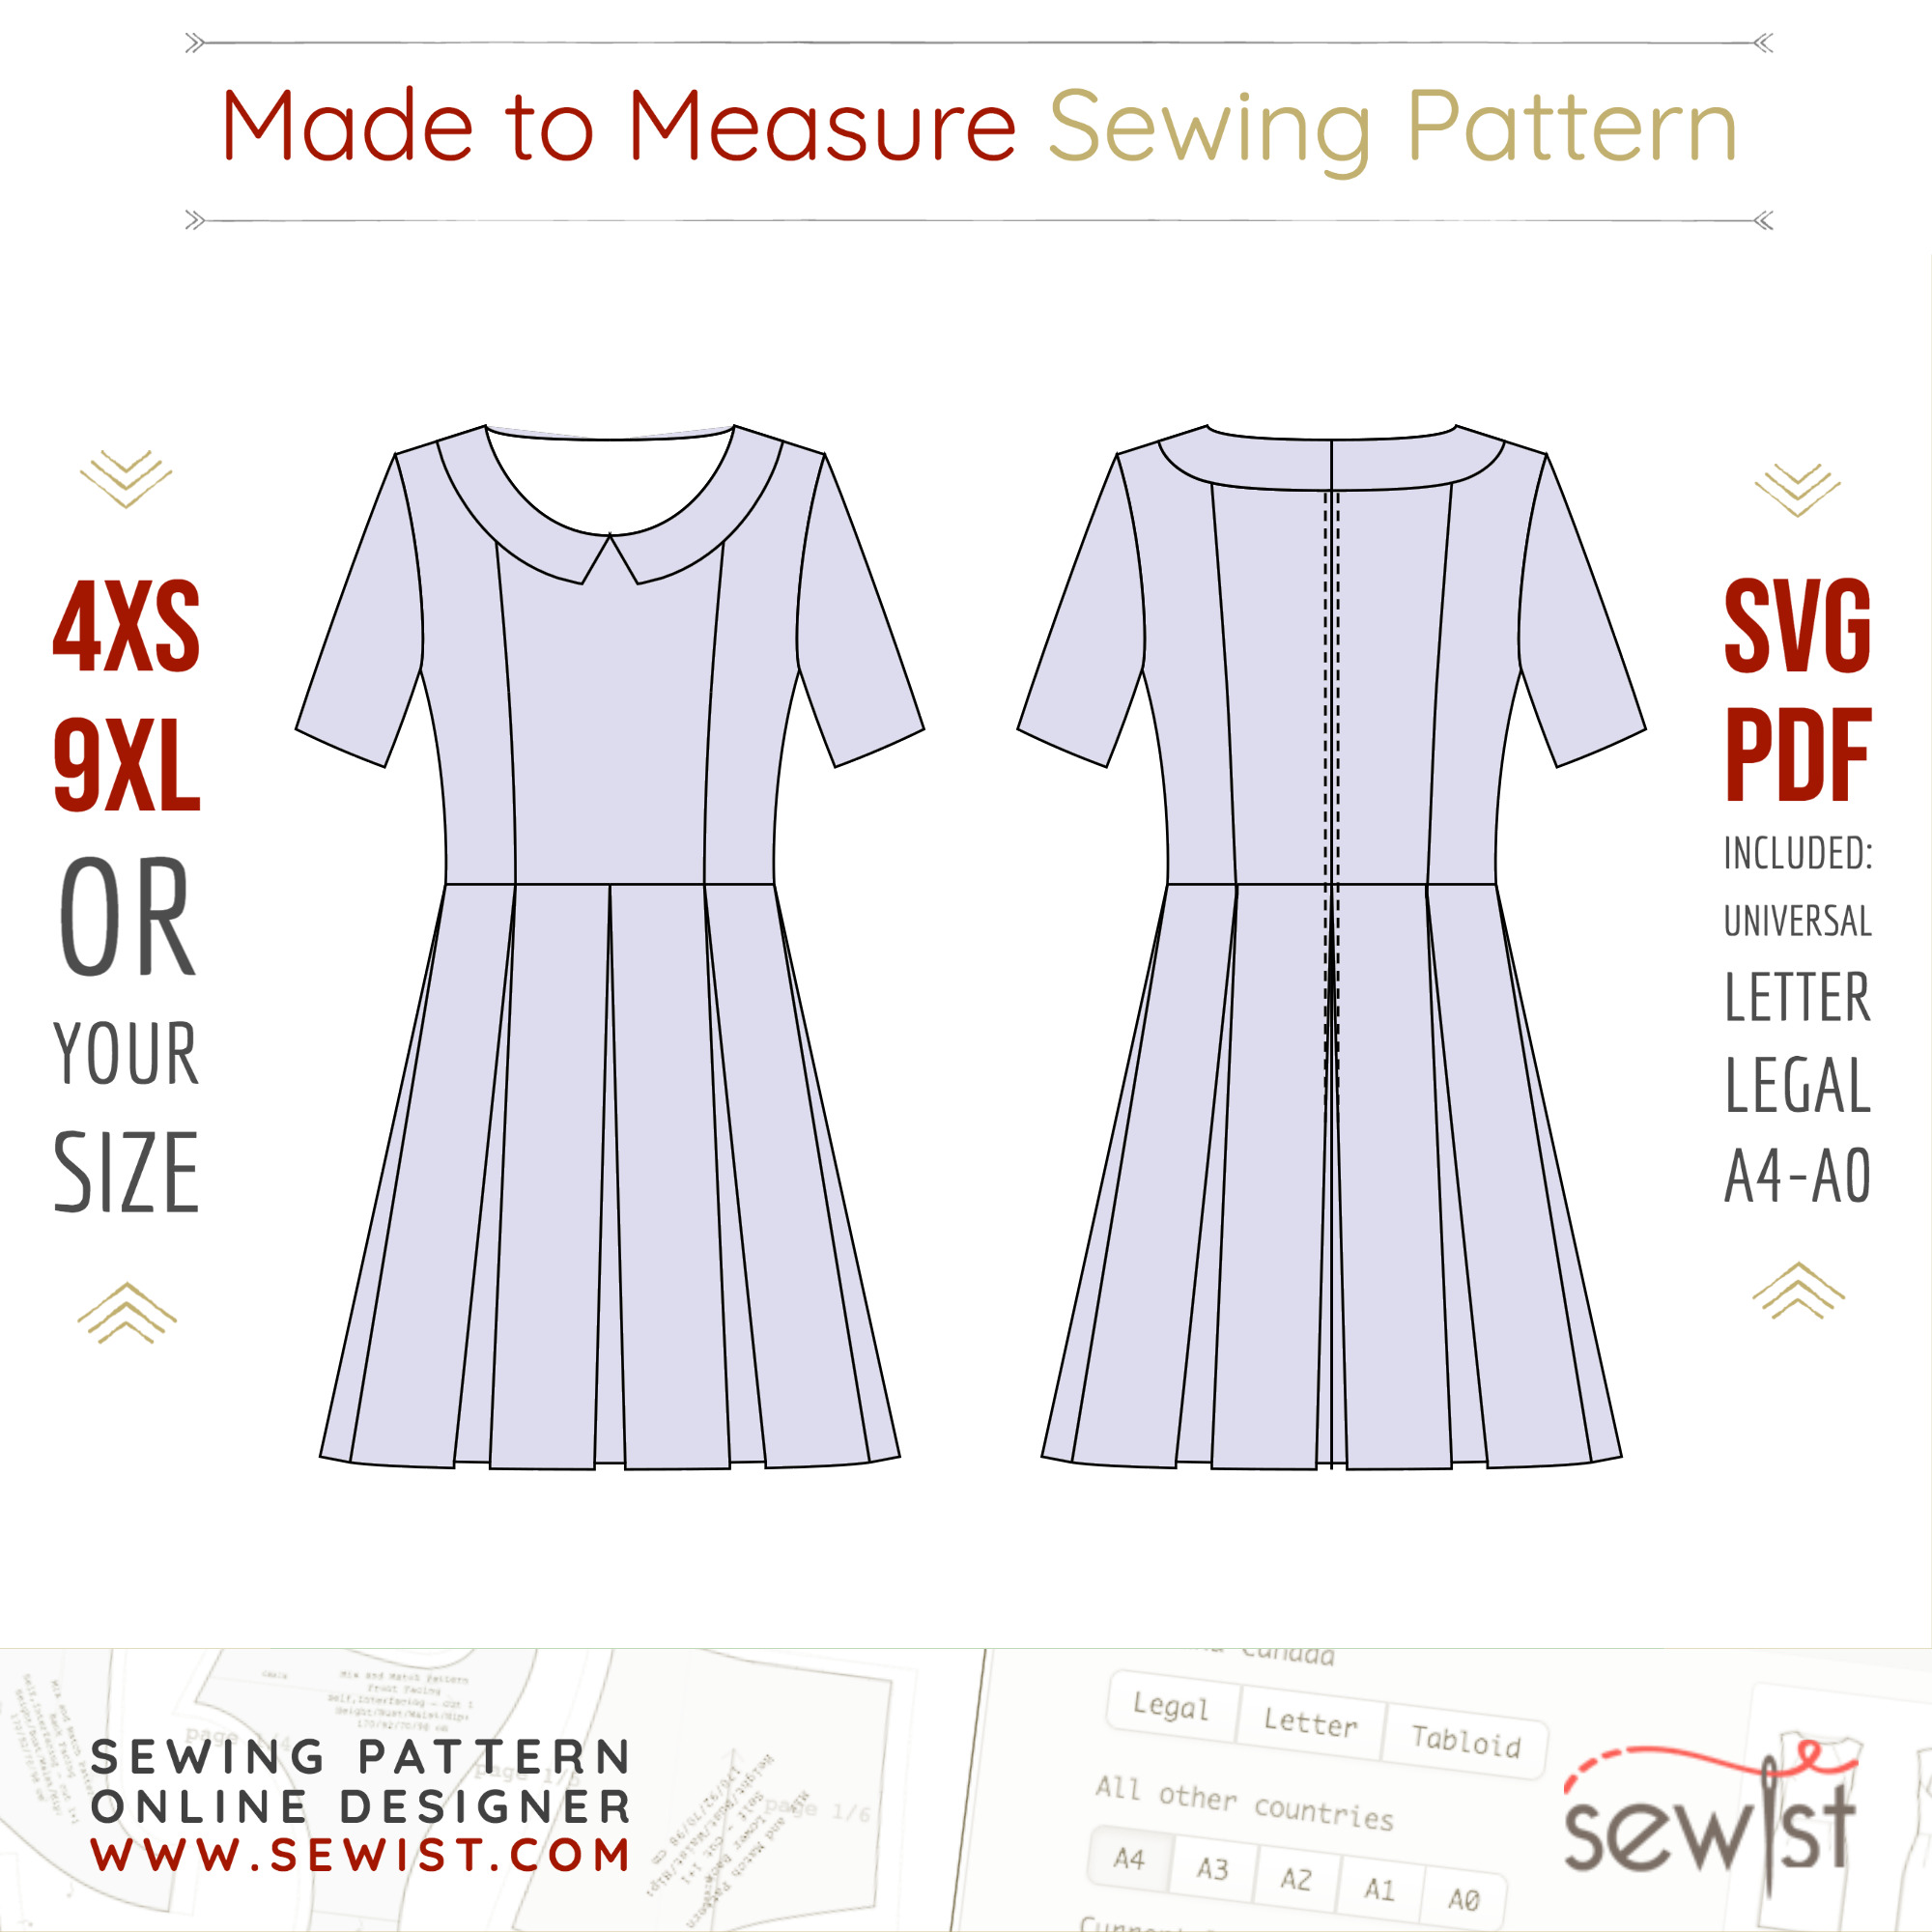 Get a FREE sewing pattern to test the system - Sewist CAD Manual